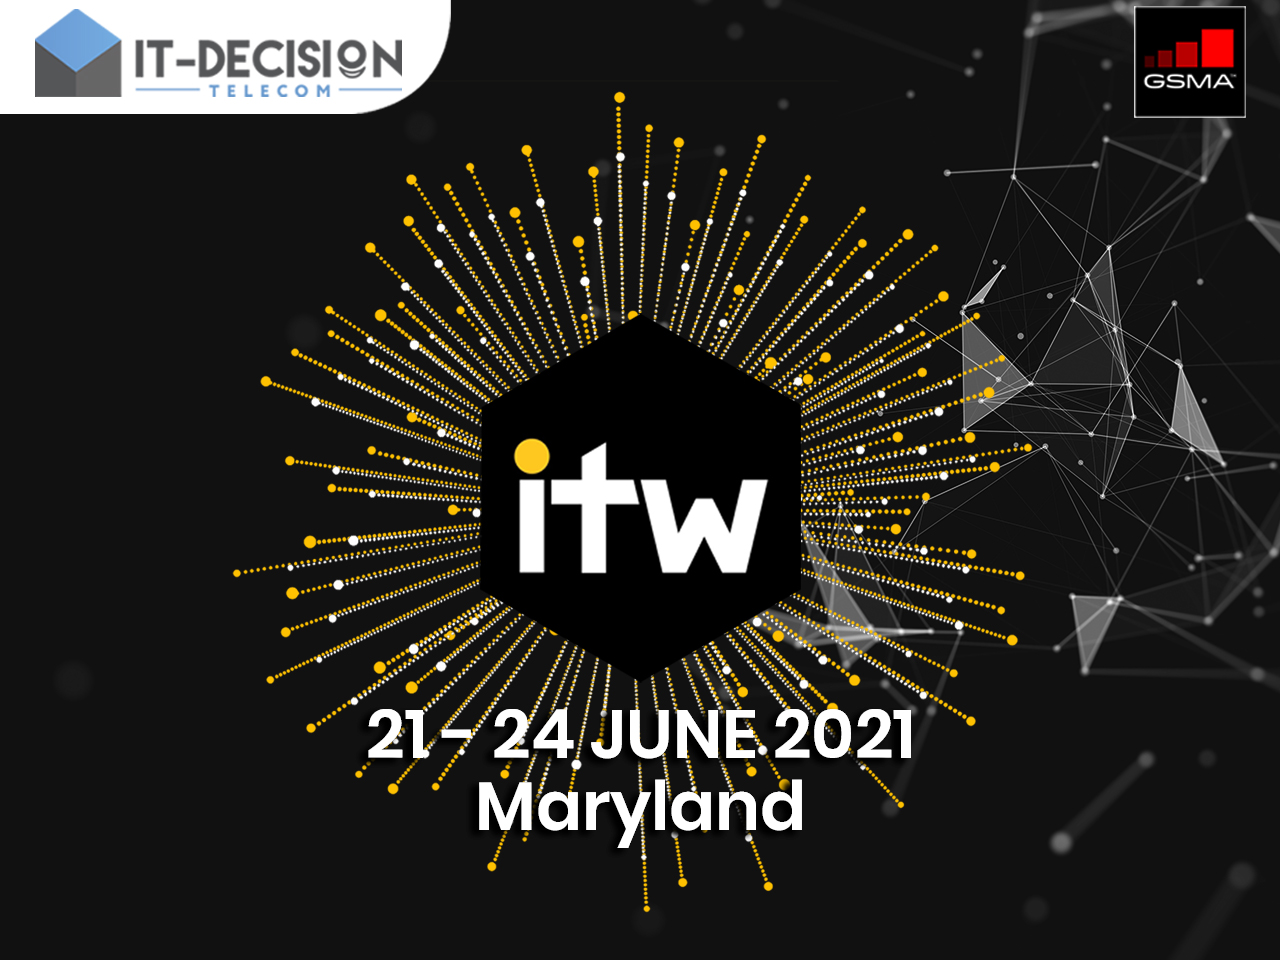 IT-Decision Telecom will be a Bronze Sponsor of ITW2021!